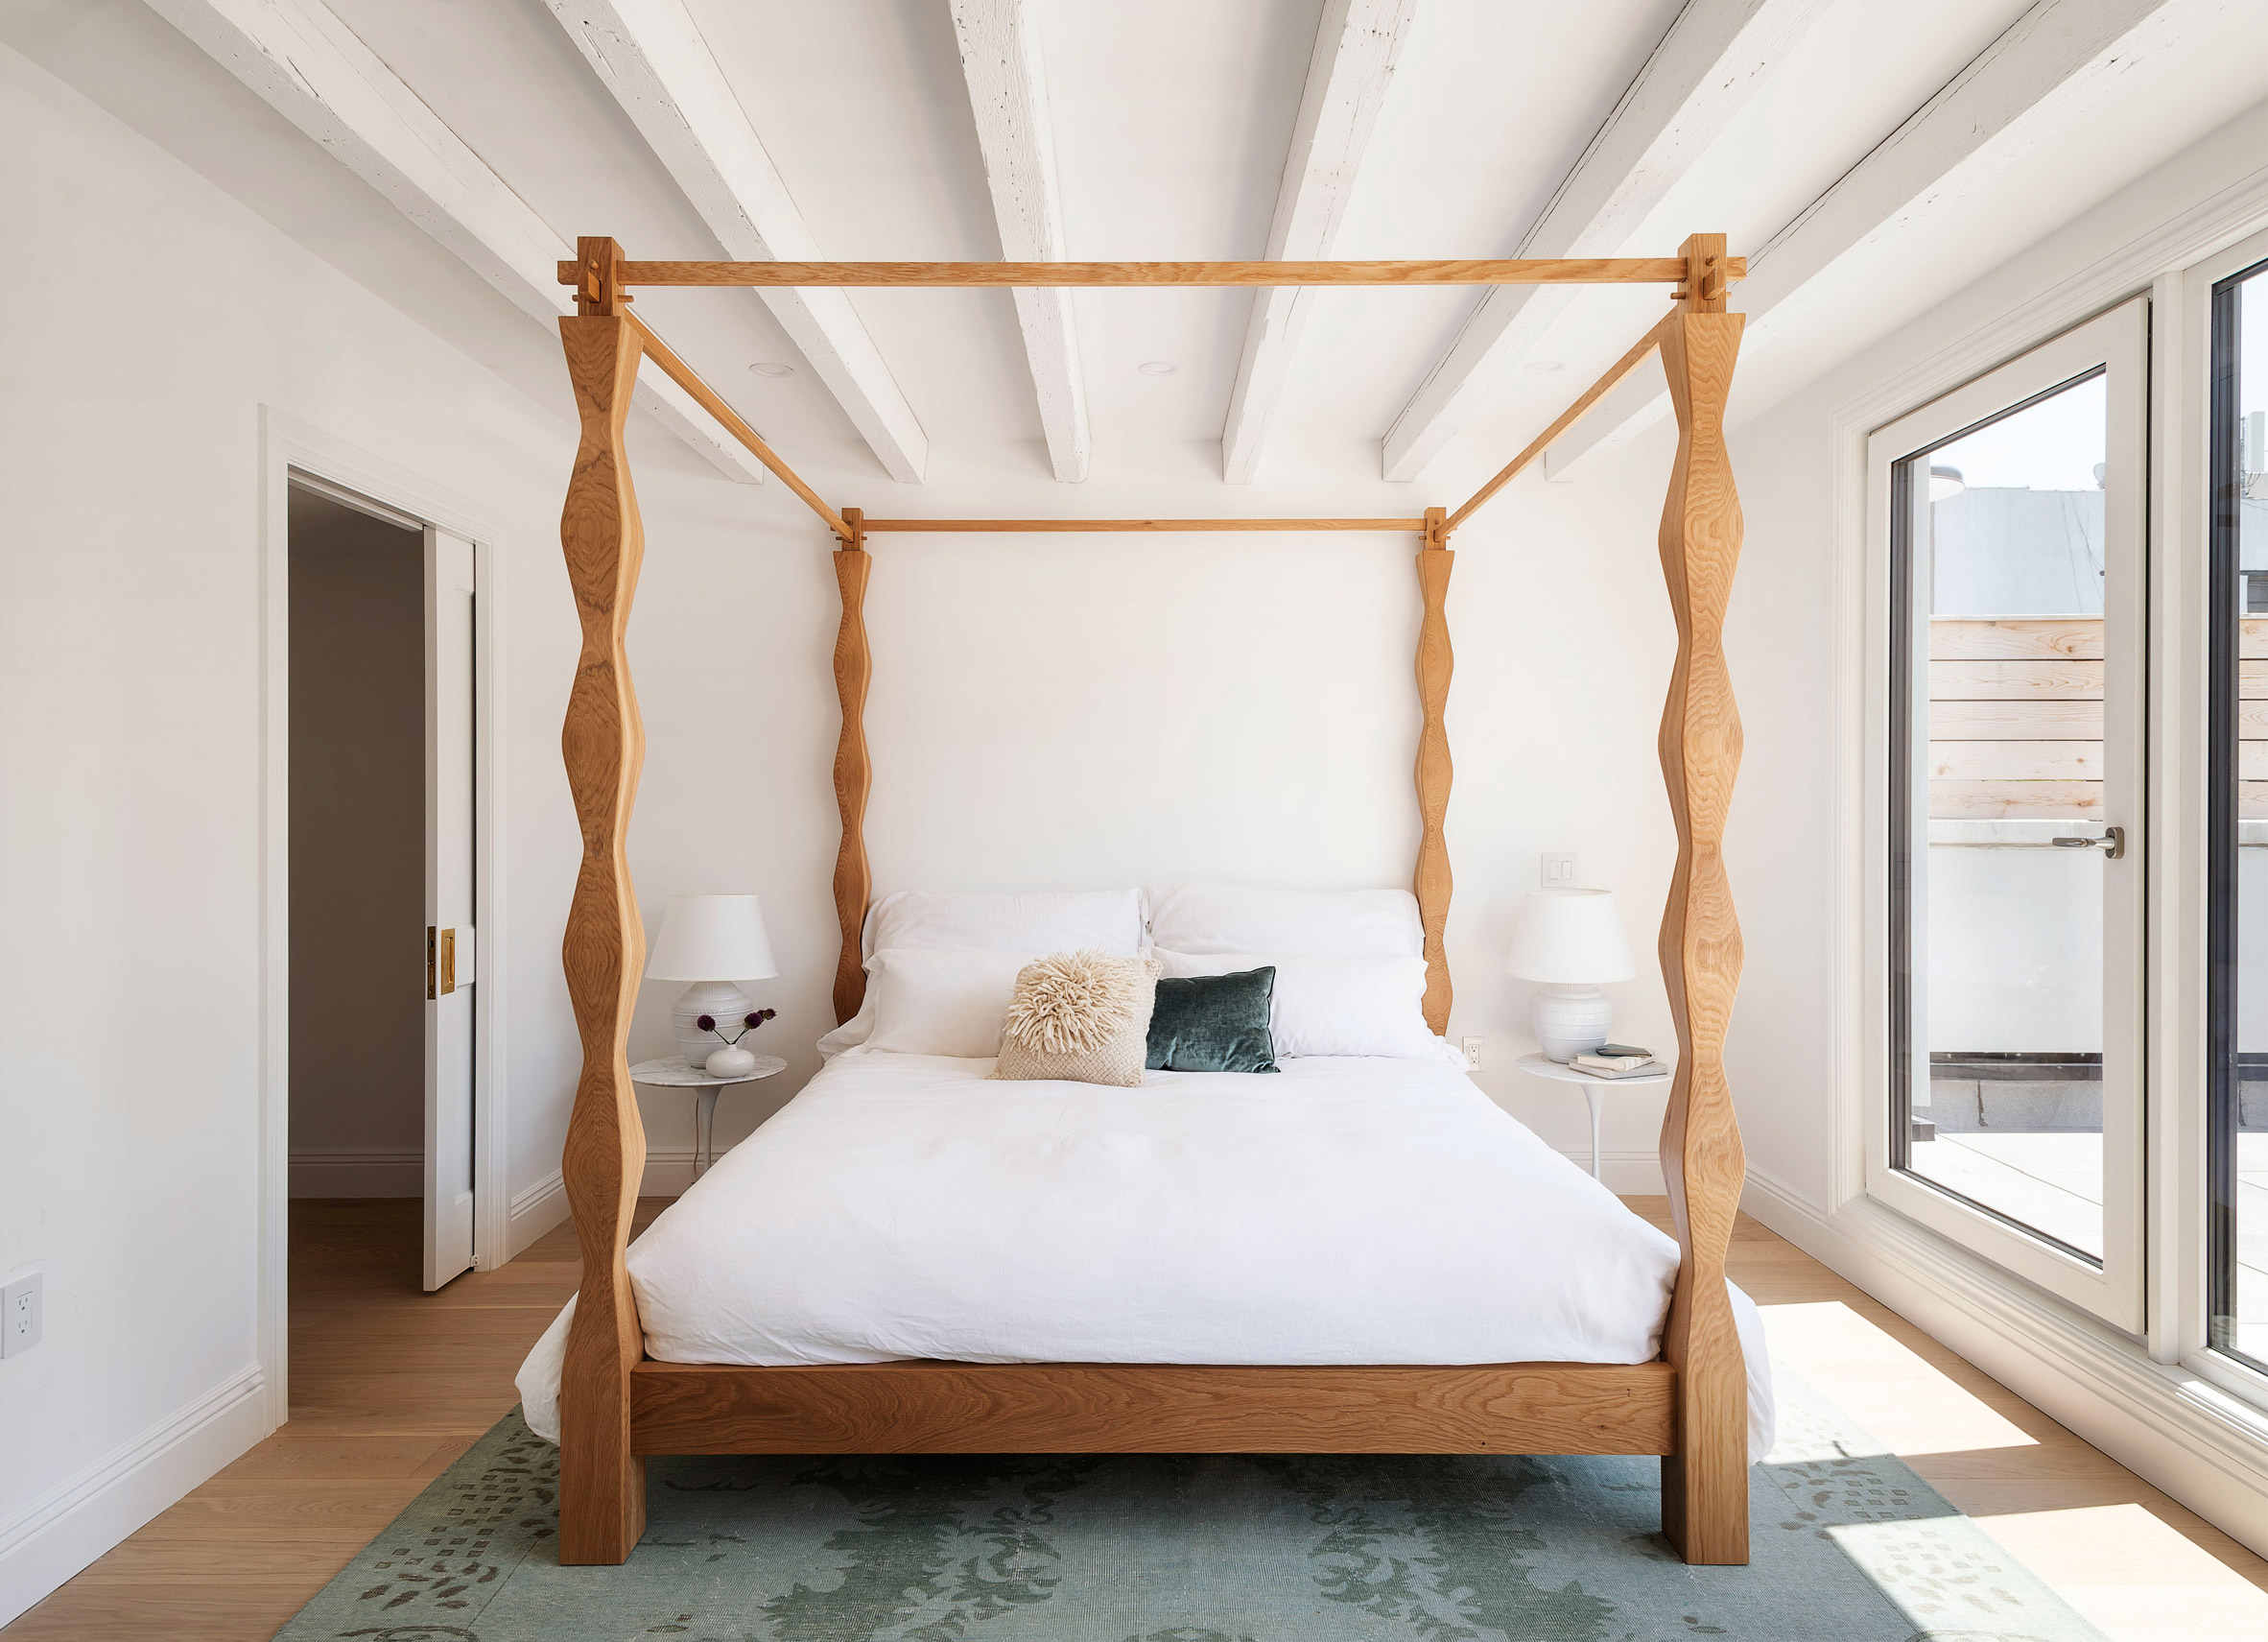 The Sackett Street townhouse's main bedroom's hand-crafted bed